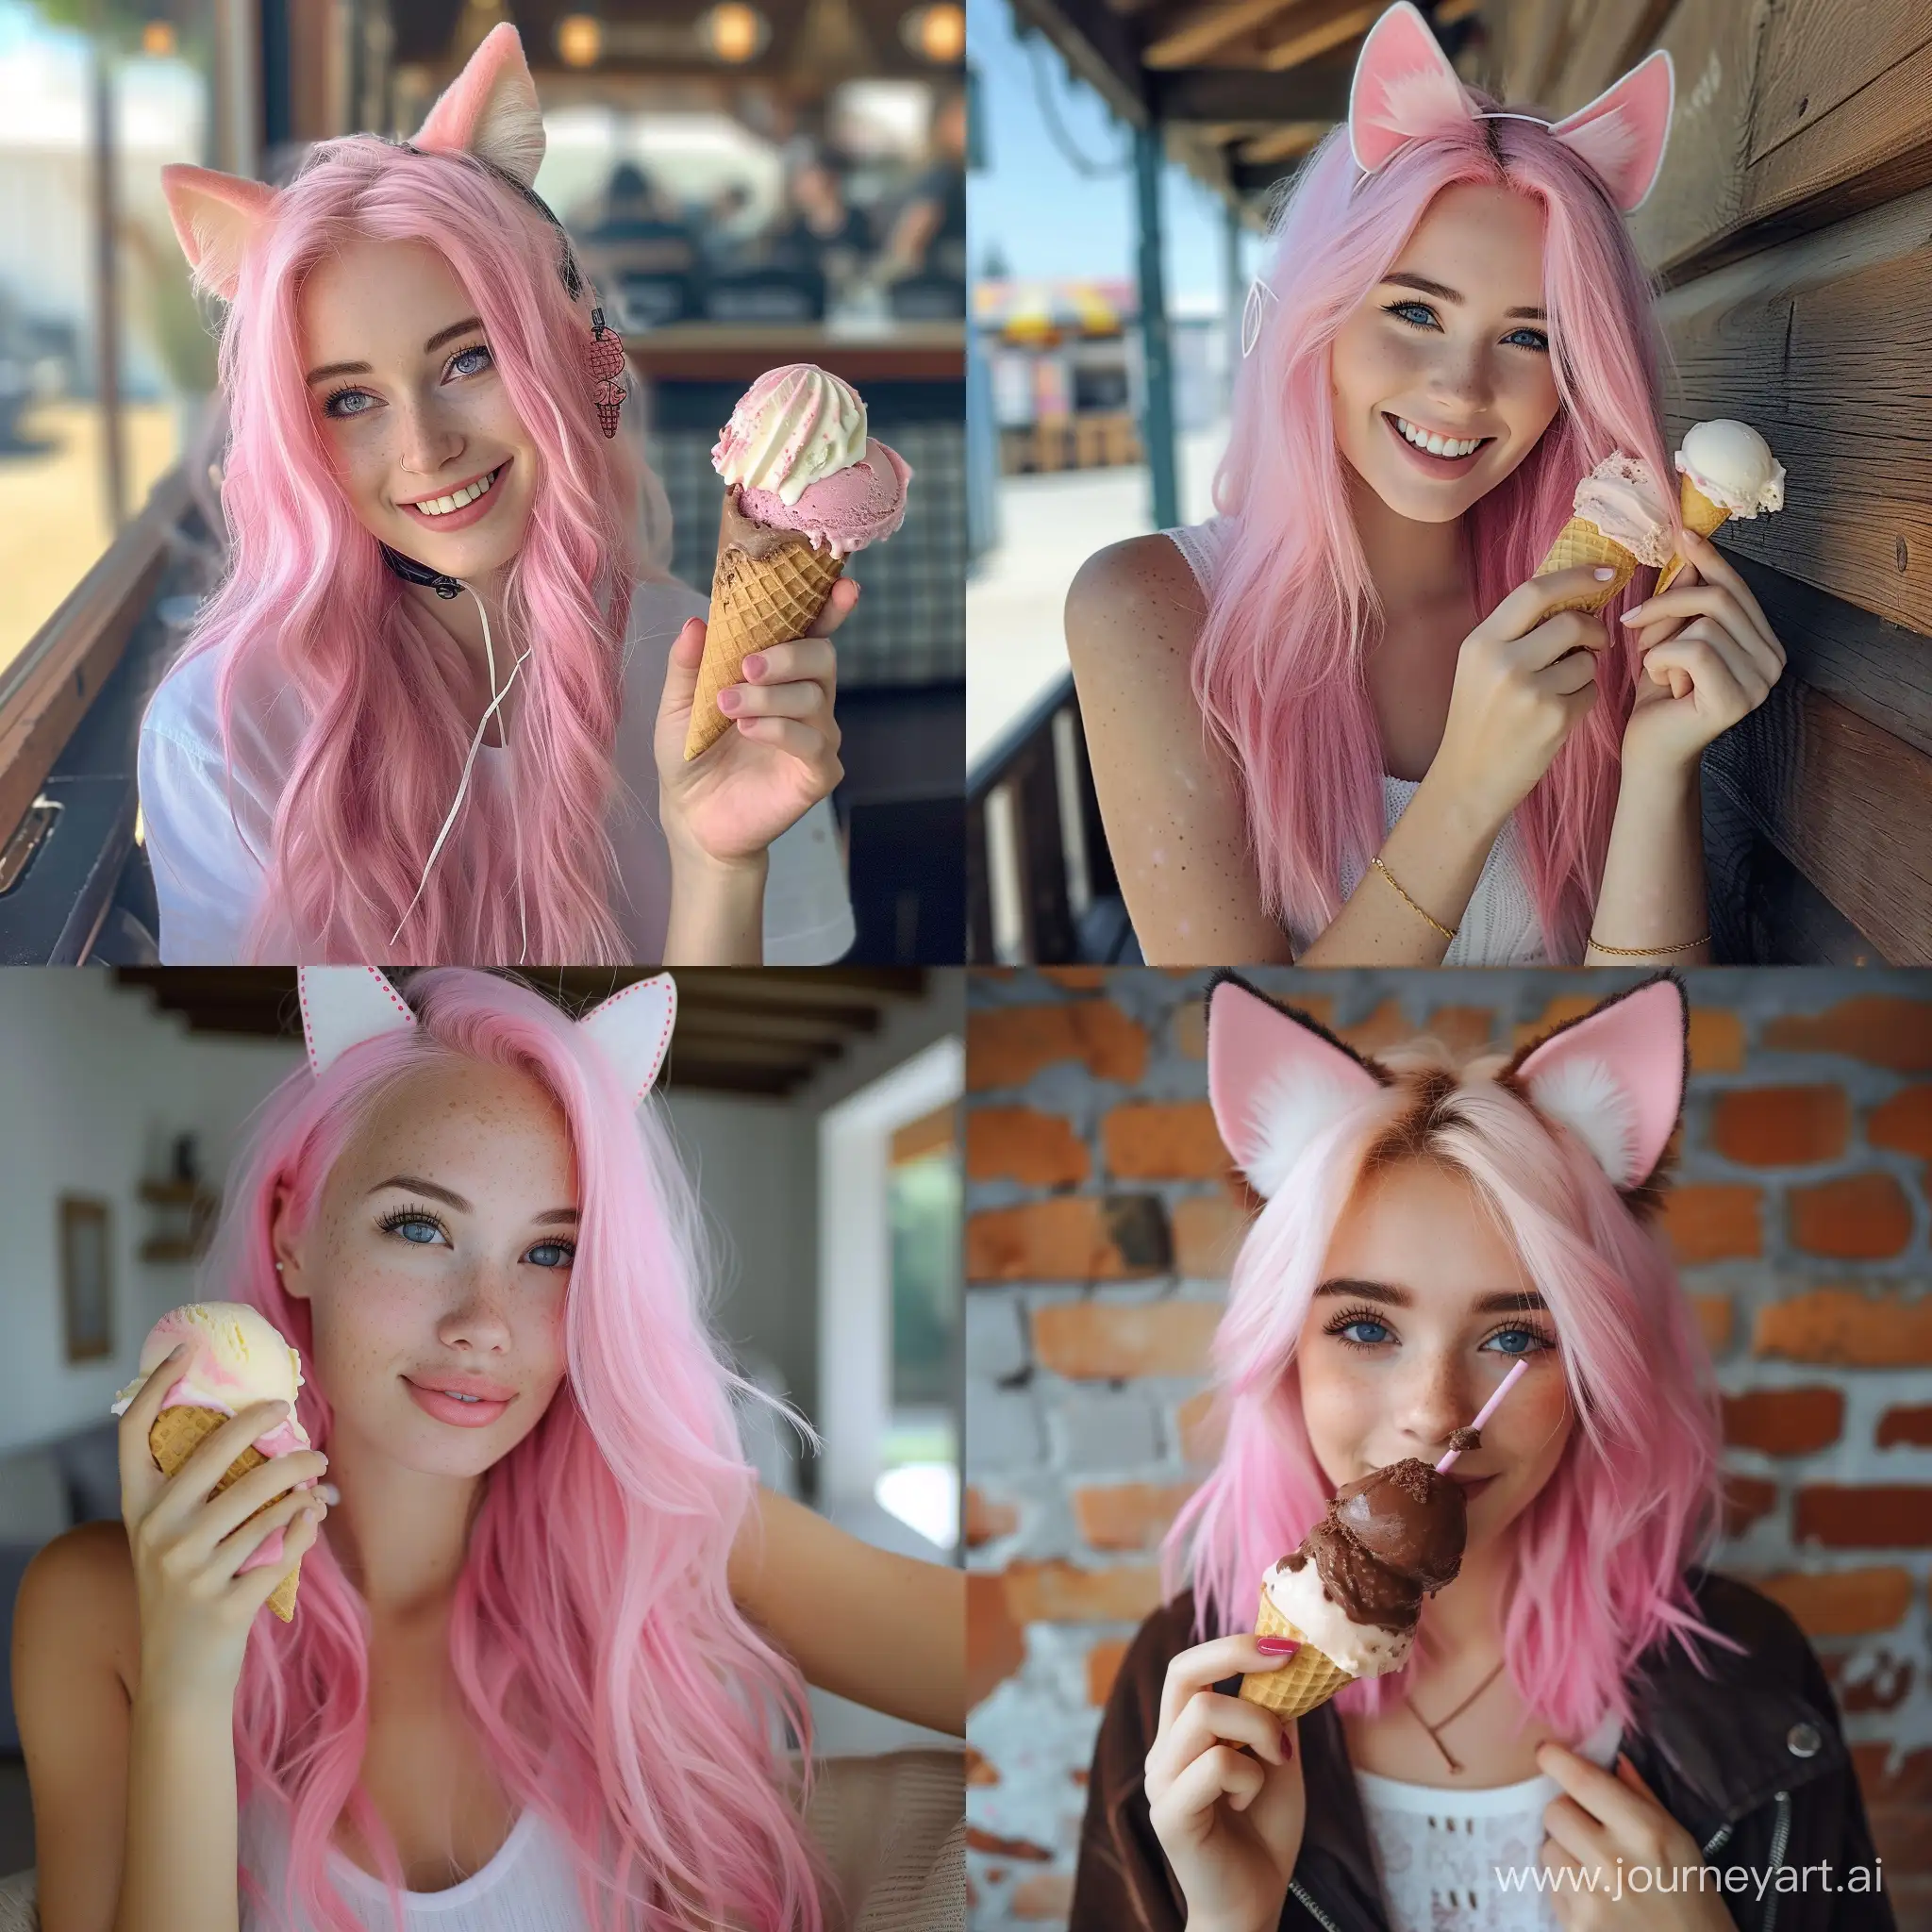 Playful-Couple-with-Pink-Hair-and-Cat-Ears-Enjoying-Sweet-Moments-with-Ice-Cream